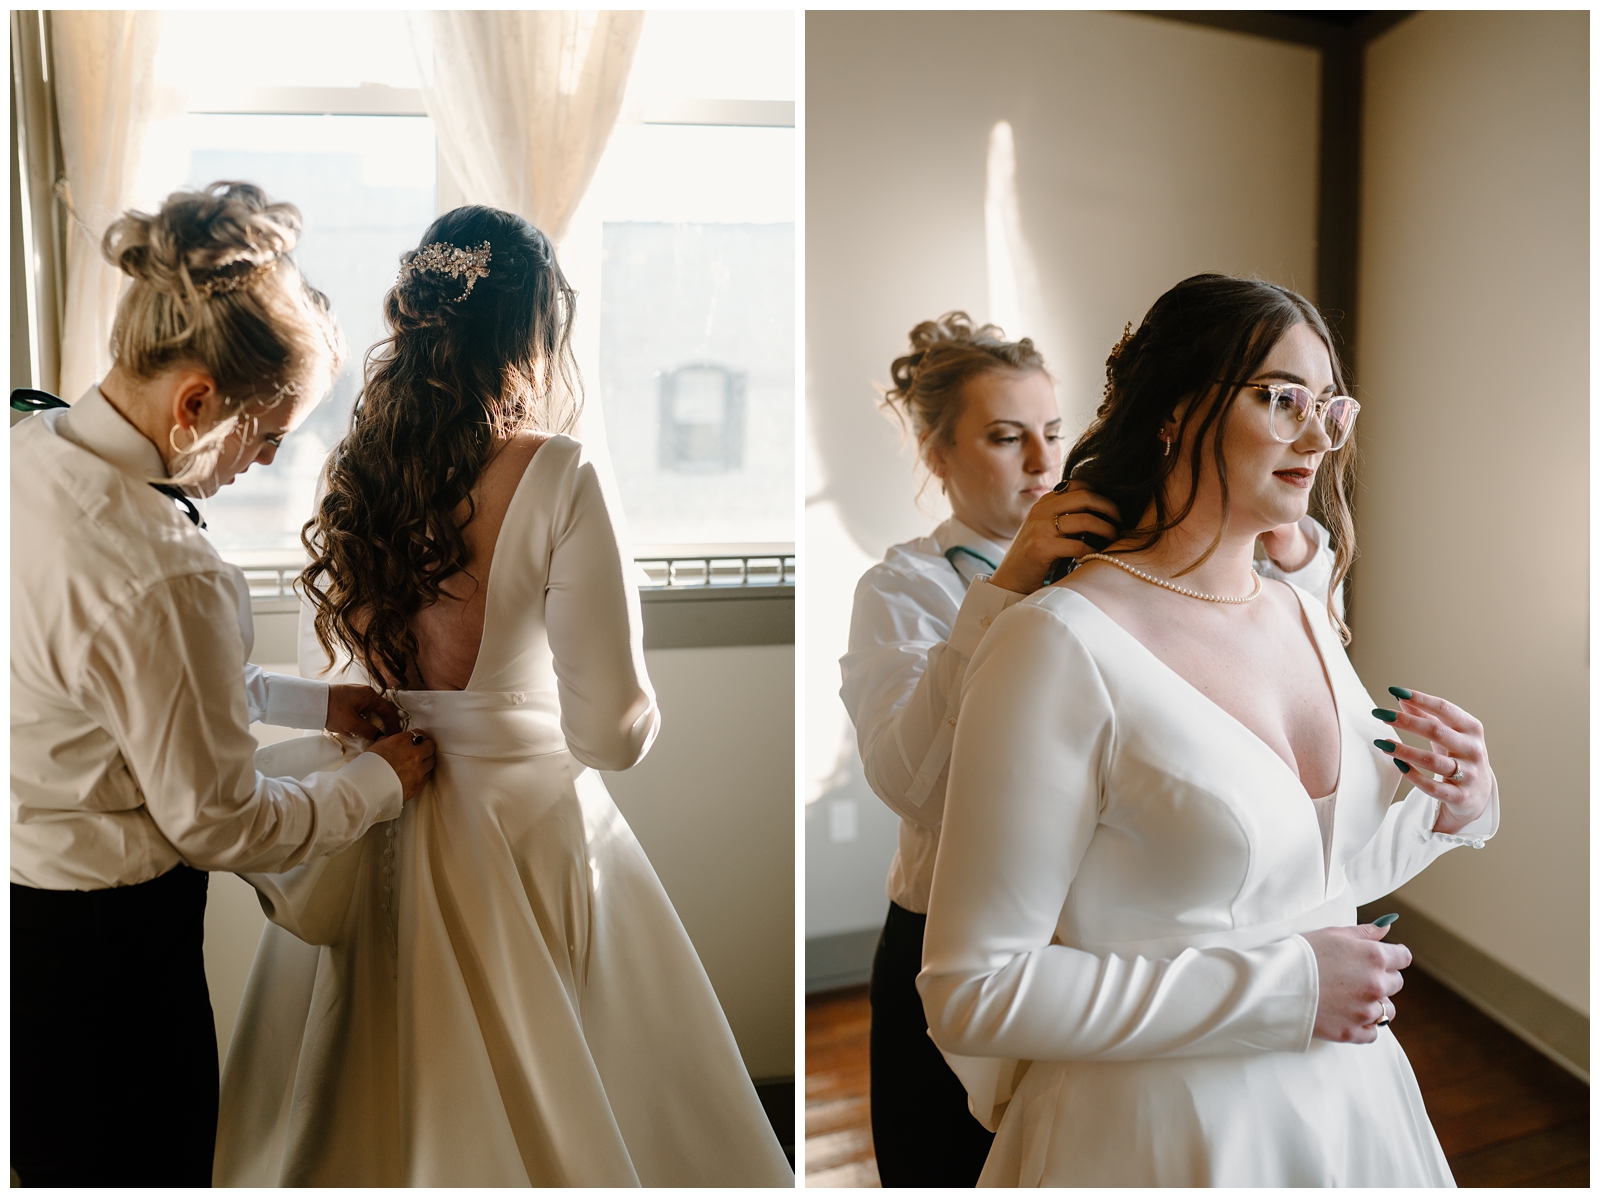 The brides helping each other get ready for their elopement at Bakery 1818 by Greensboro NC wedding photographer